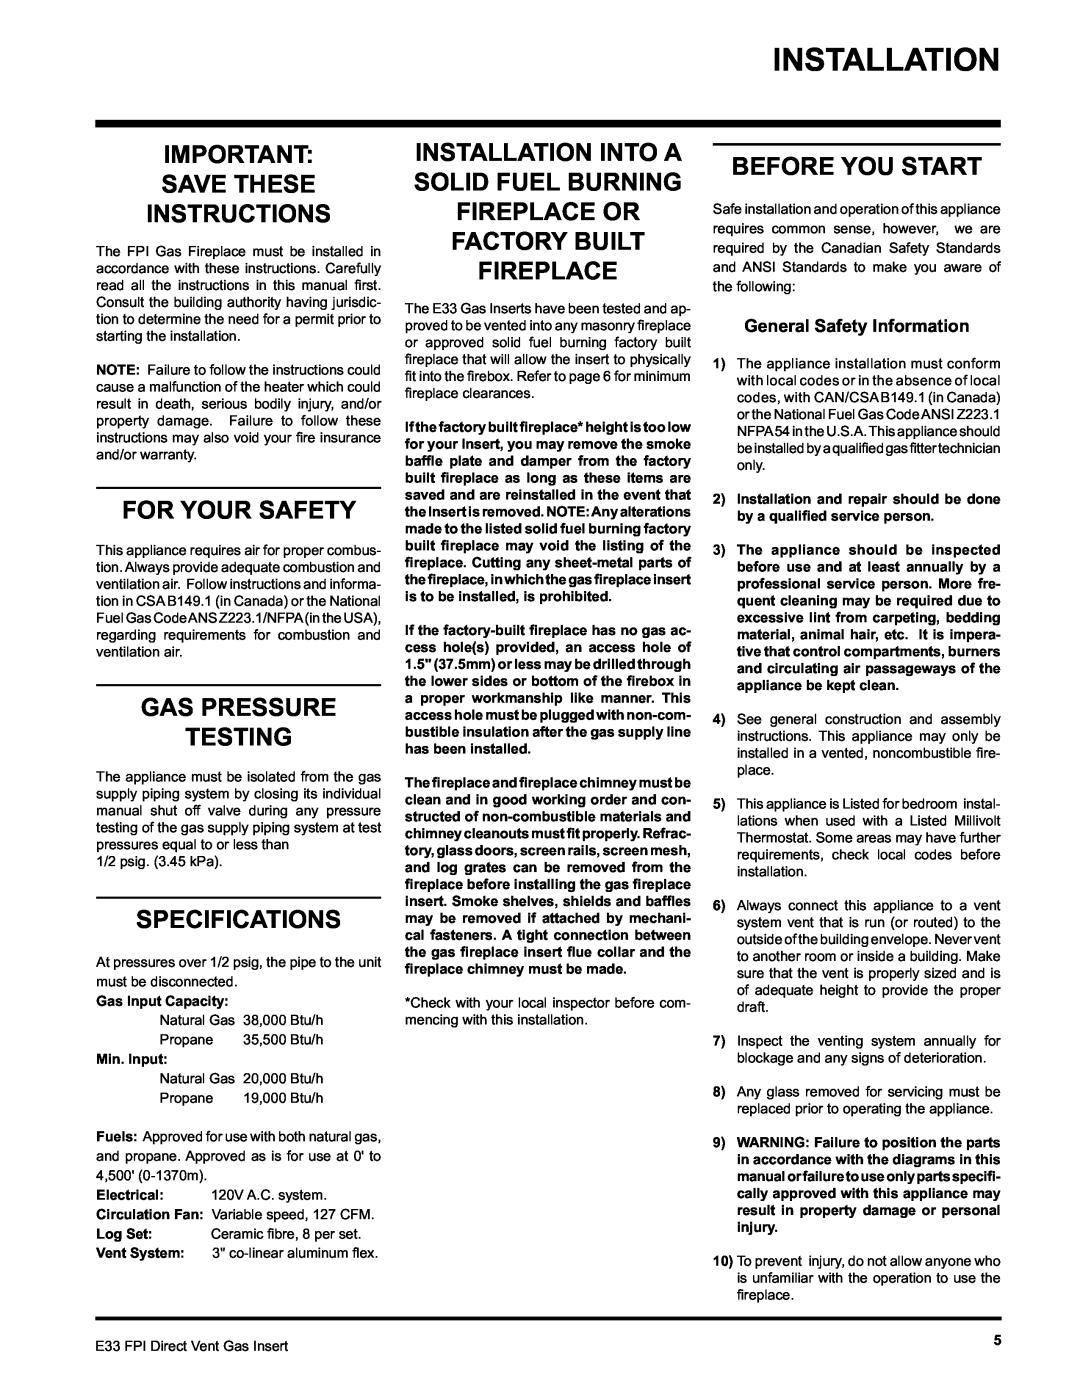 Regency E33-LP Installation, Save These Instructions, For Your Safety, Gas Pressure Testing, Specifications, Min. Input 